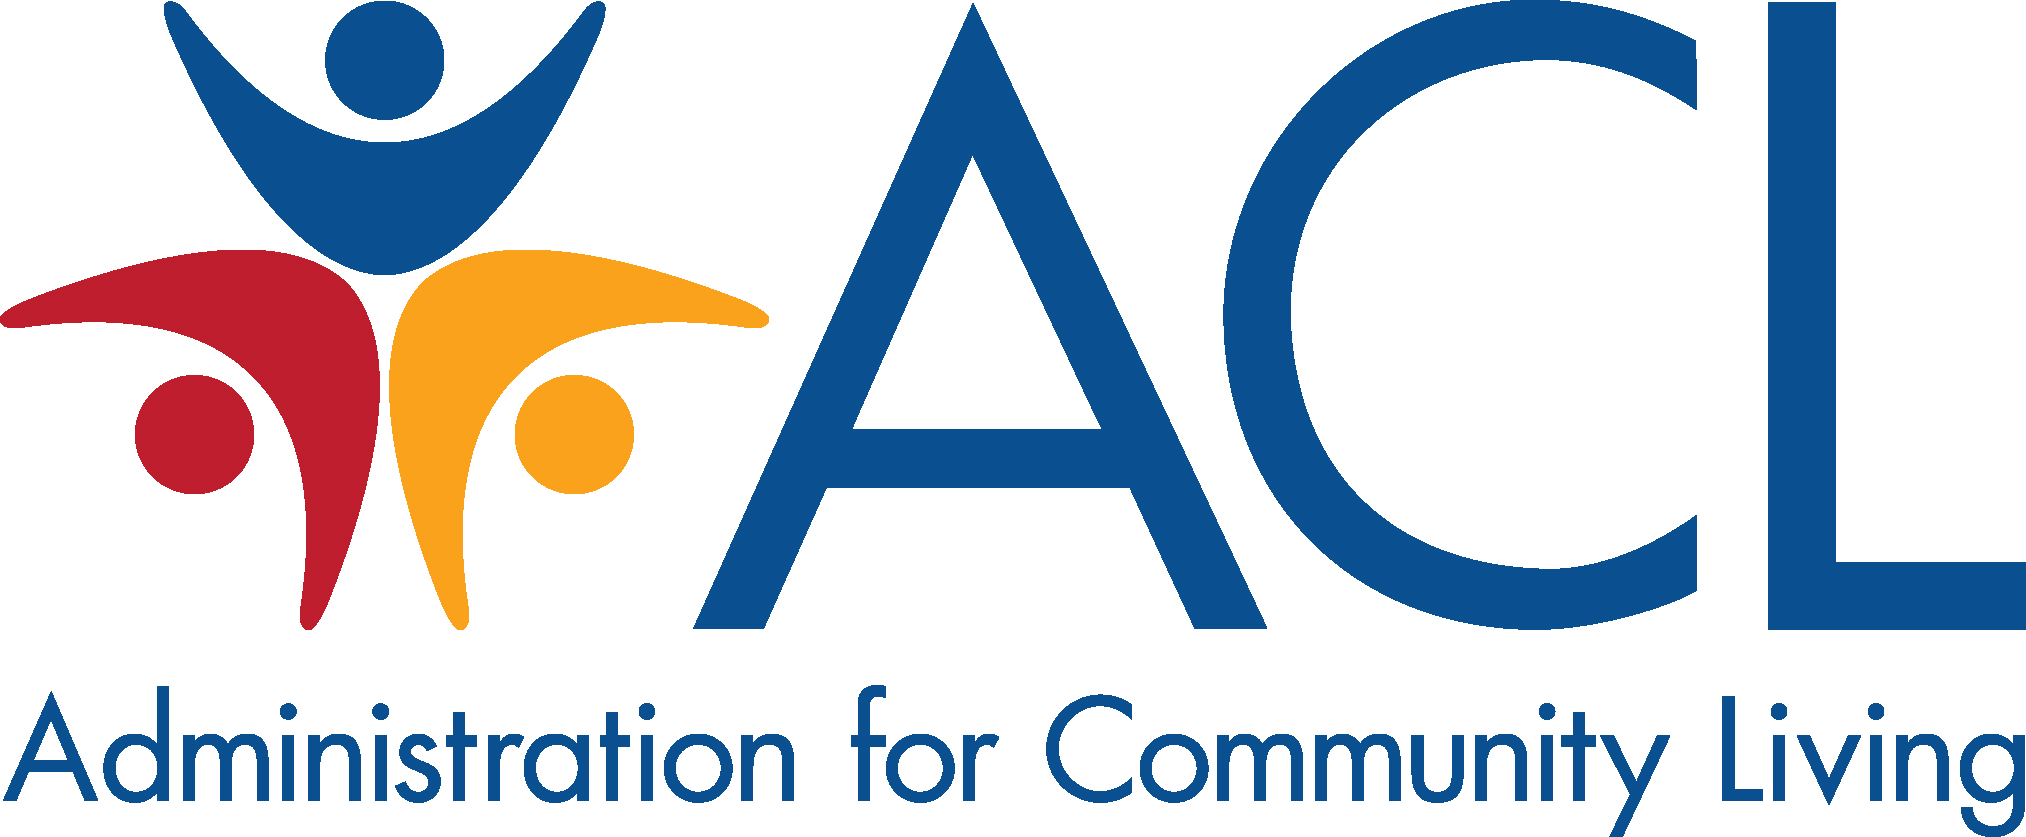 ACL Administration for Community Living Logo